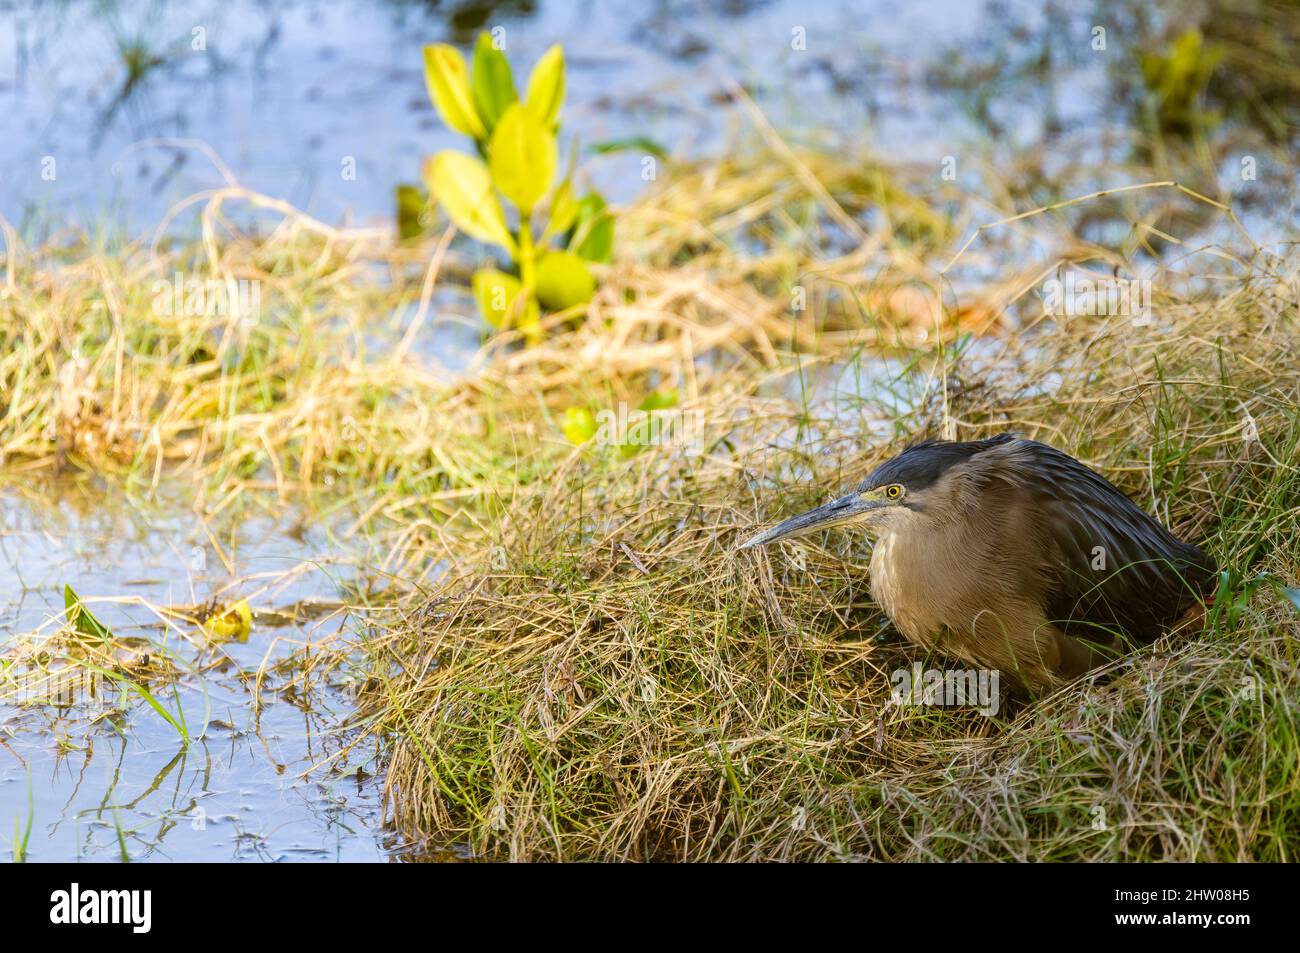 A single adult Striated Heron bedded in sea grass on the Cairns Esplanade foreshore in Far North Queensland in Australia. Stock Photo